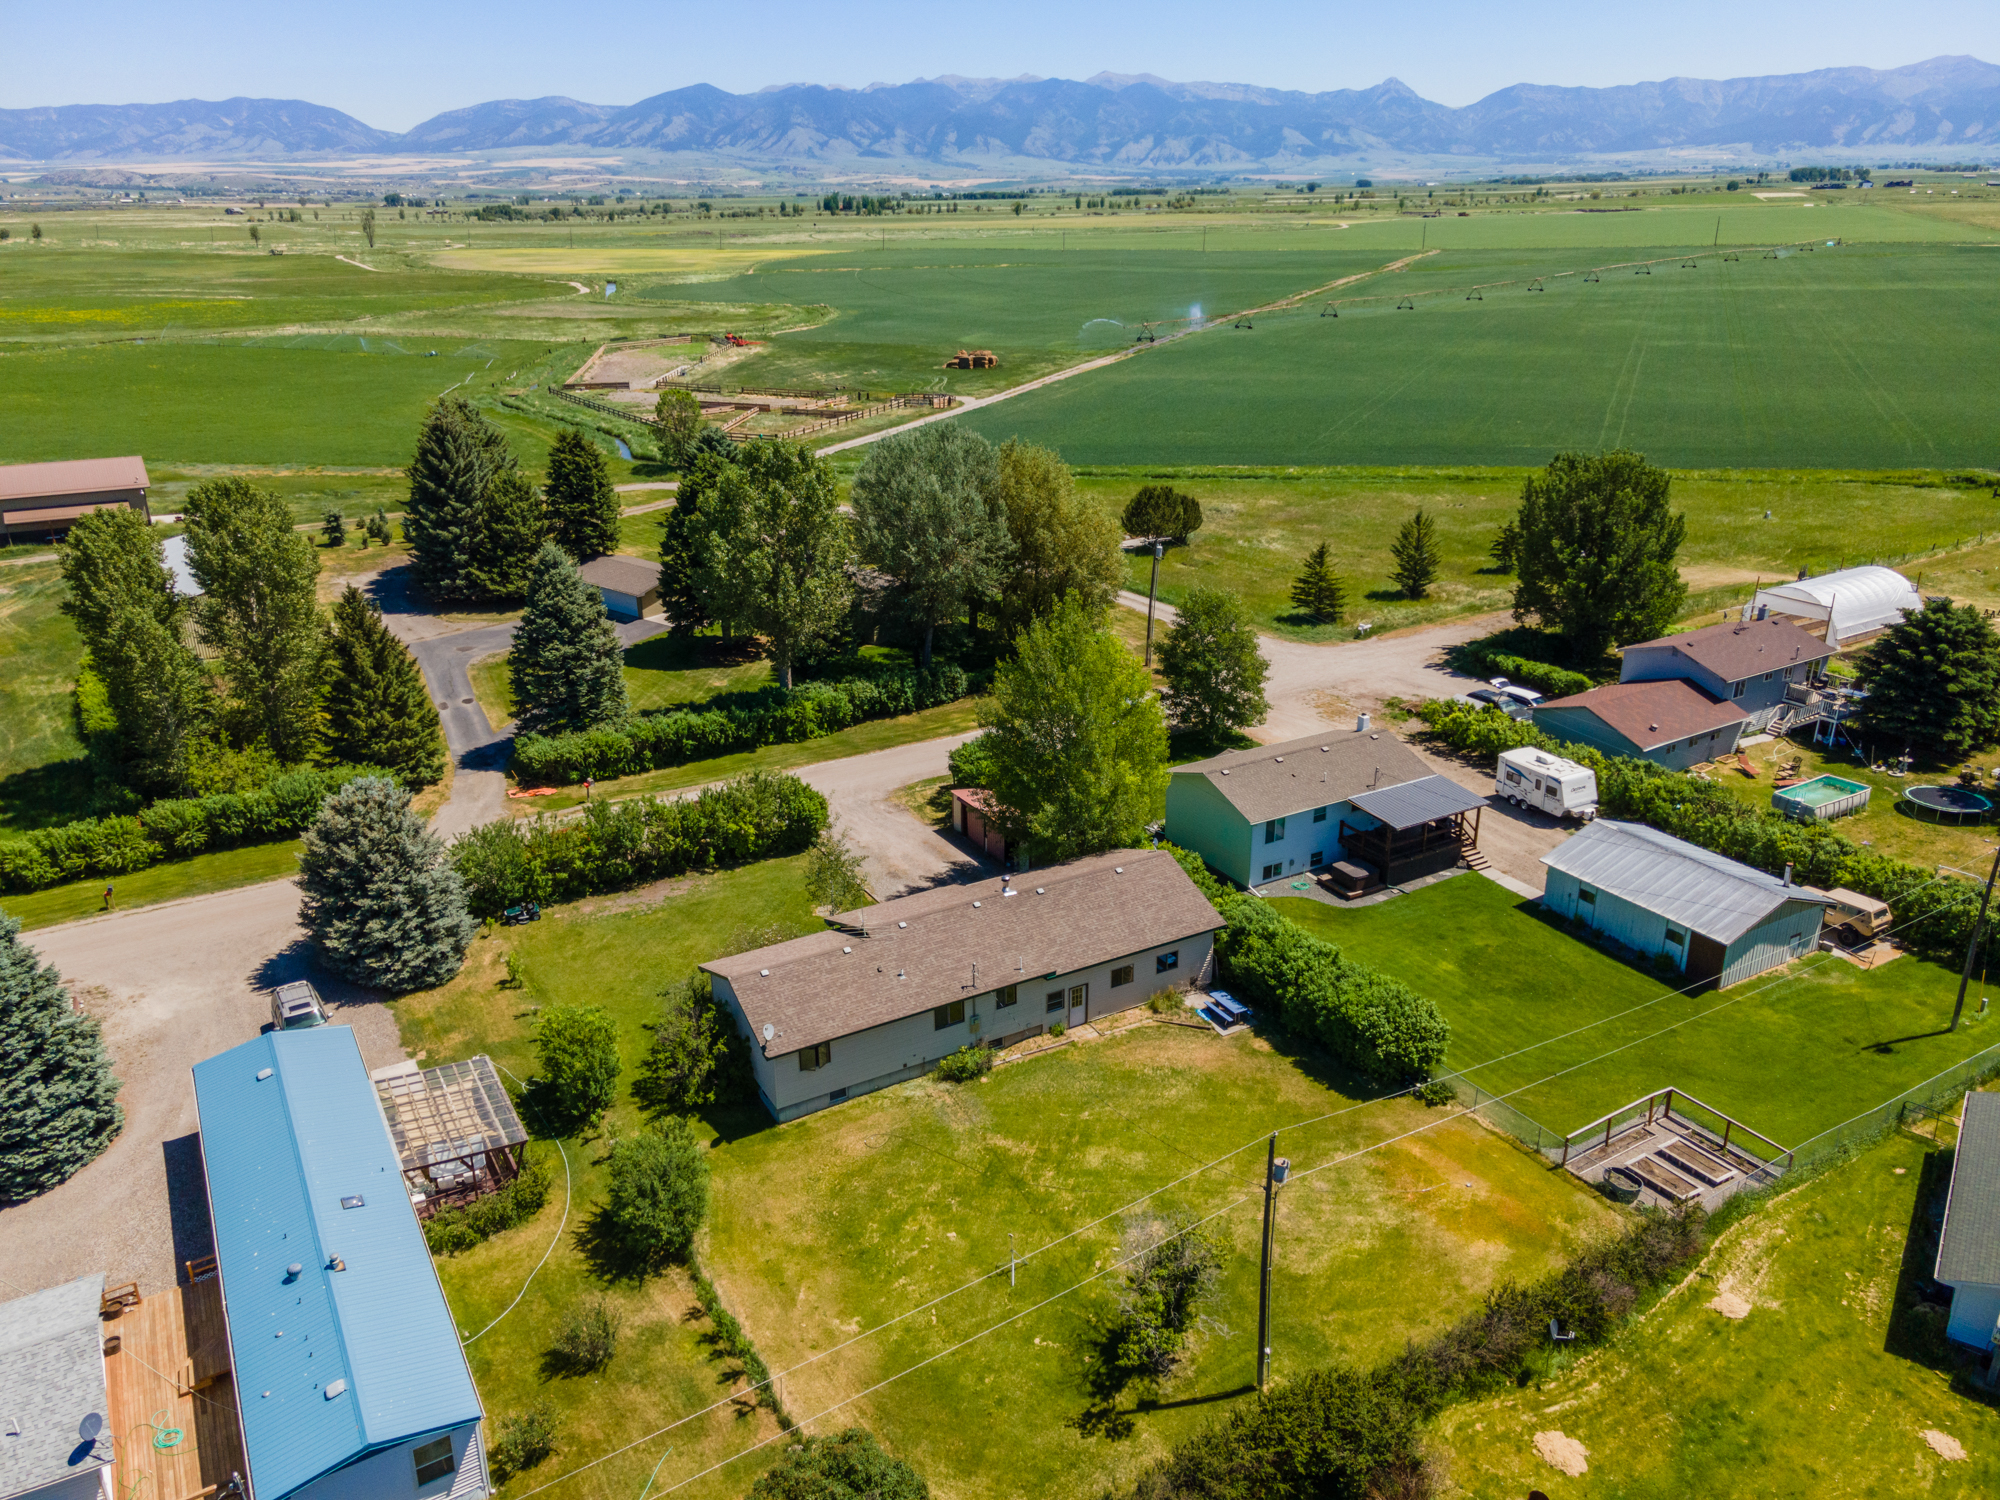 Aerial Photography and Video Services near Bozeman Montana